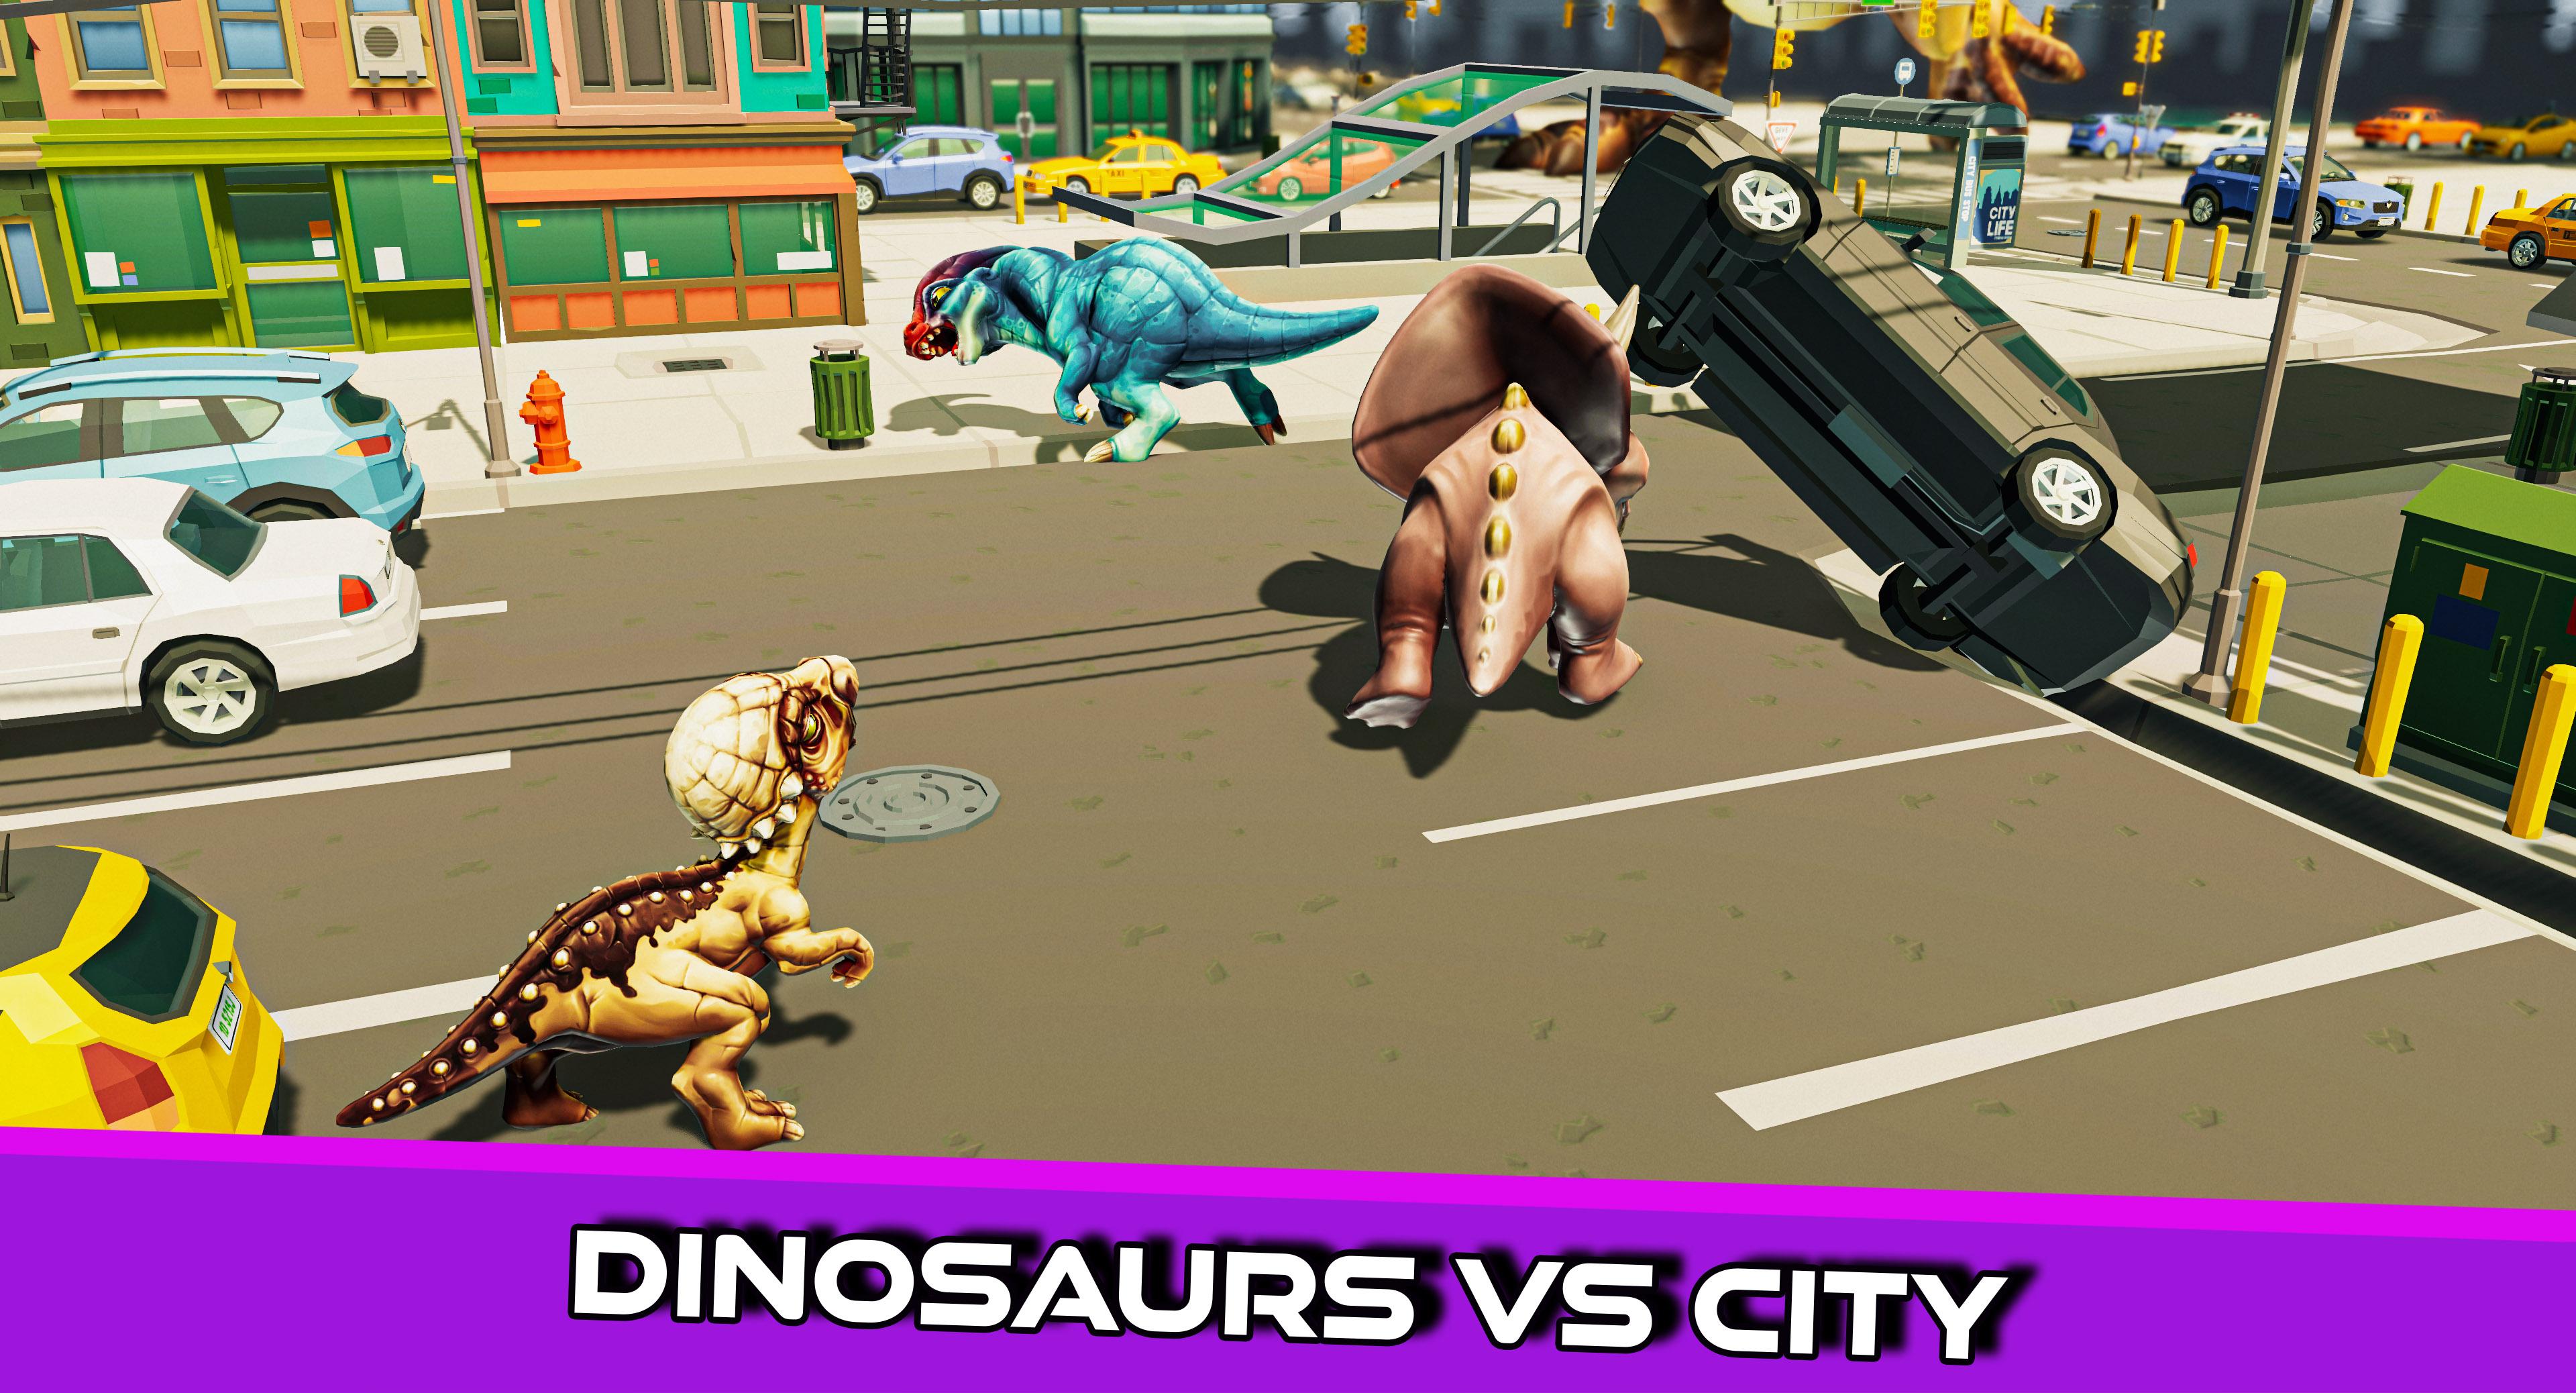 Download Jurassic Dinosaur: Dino Game android on PC